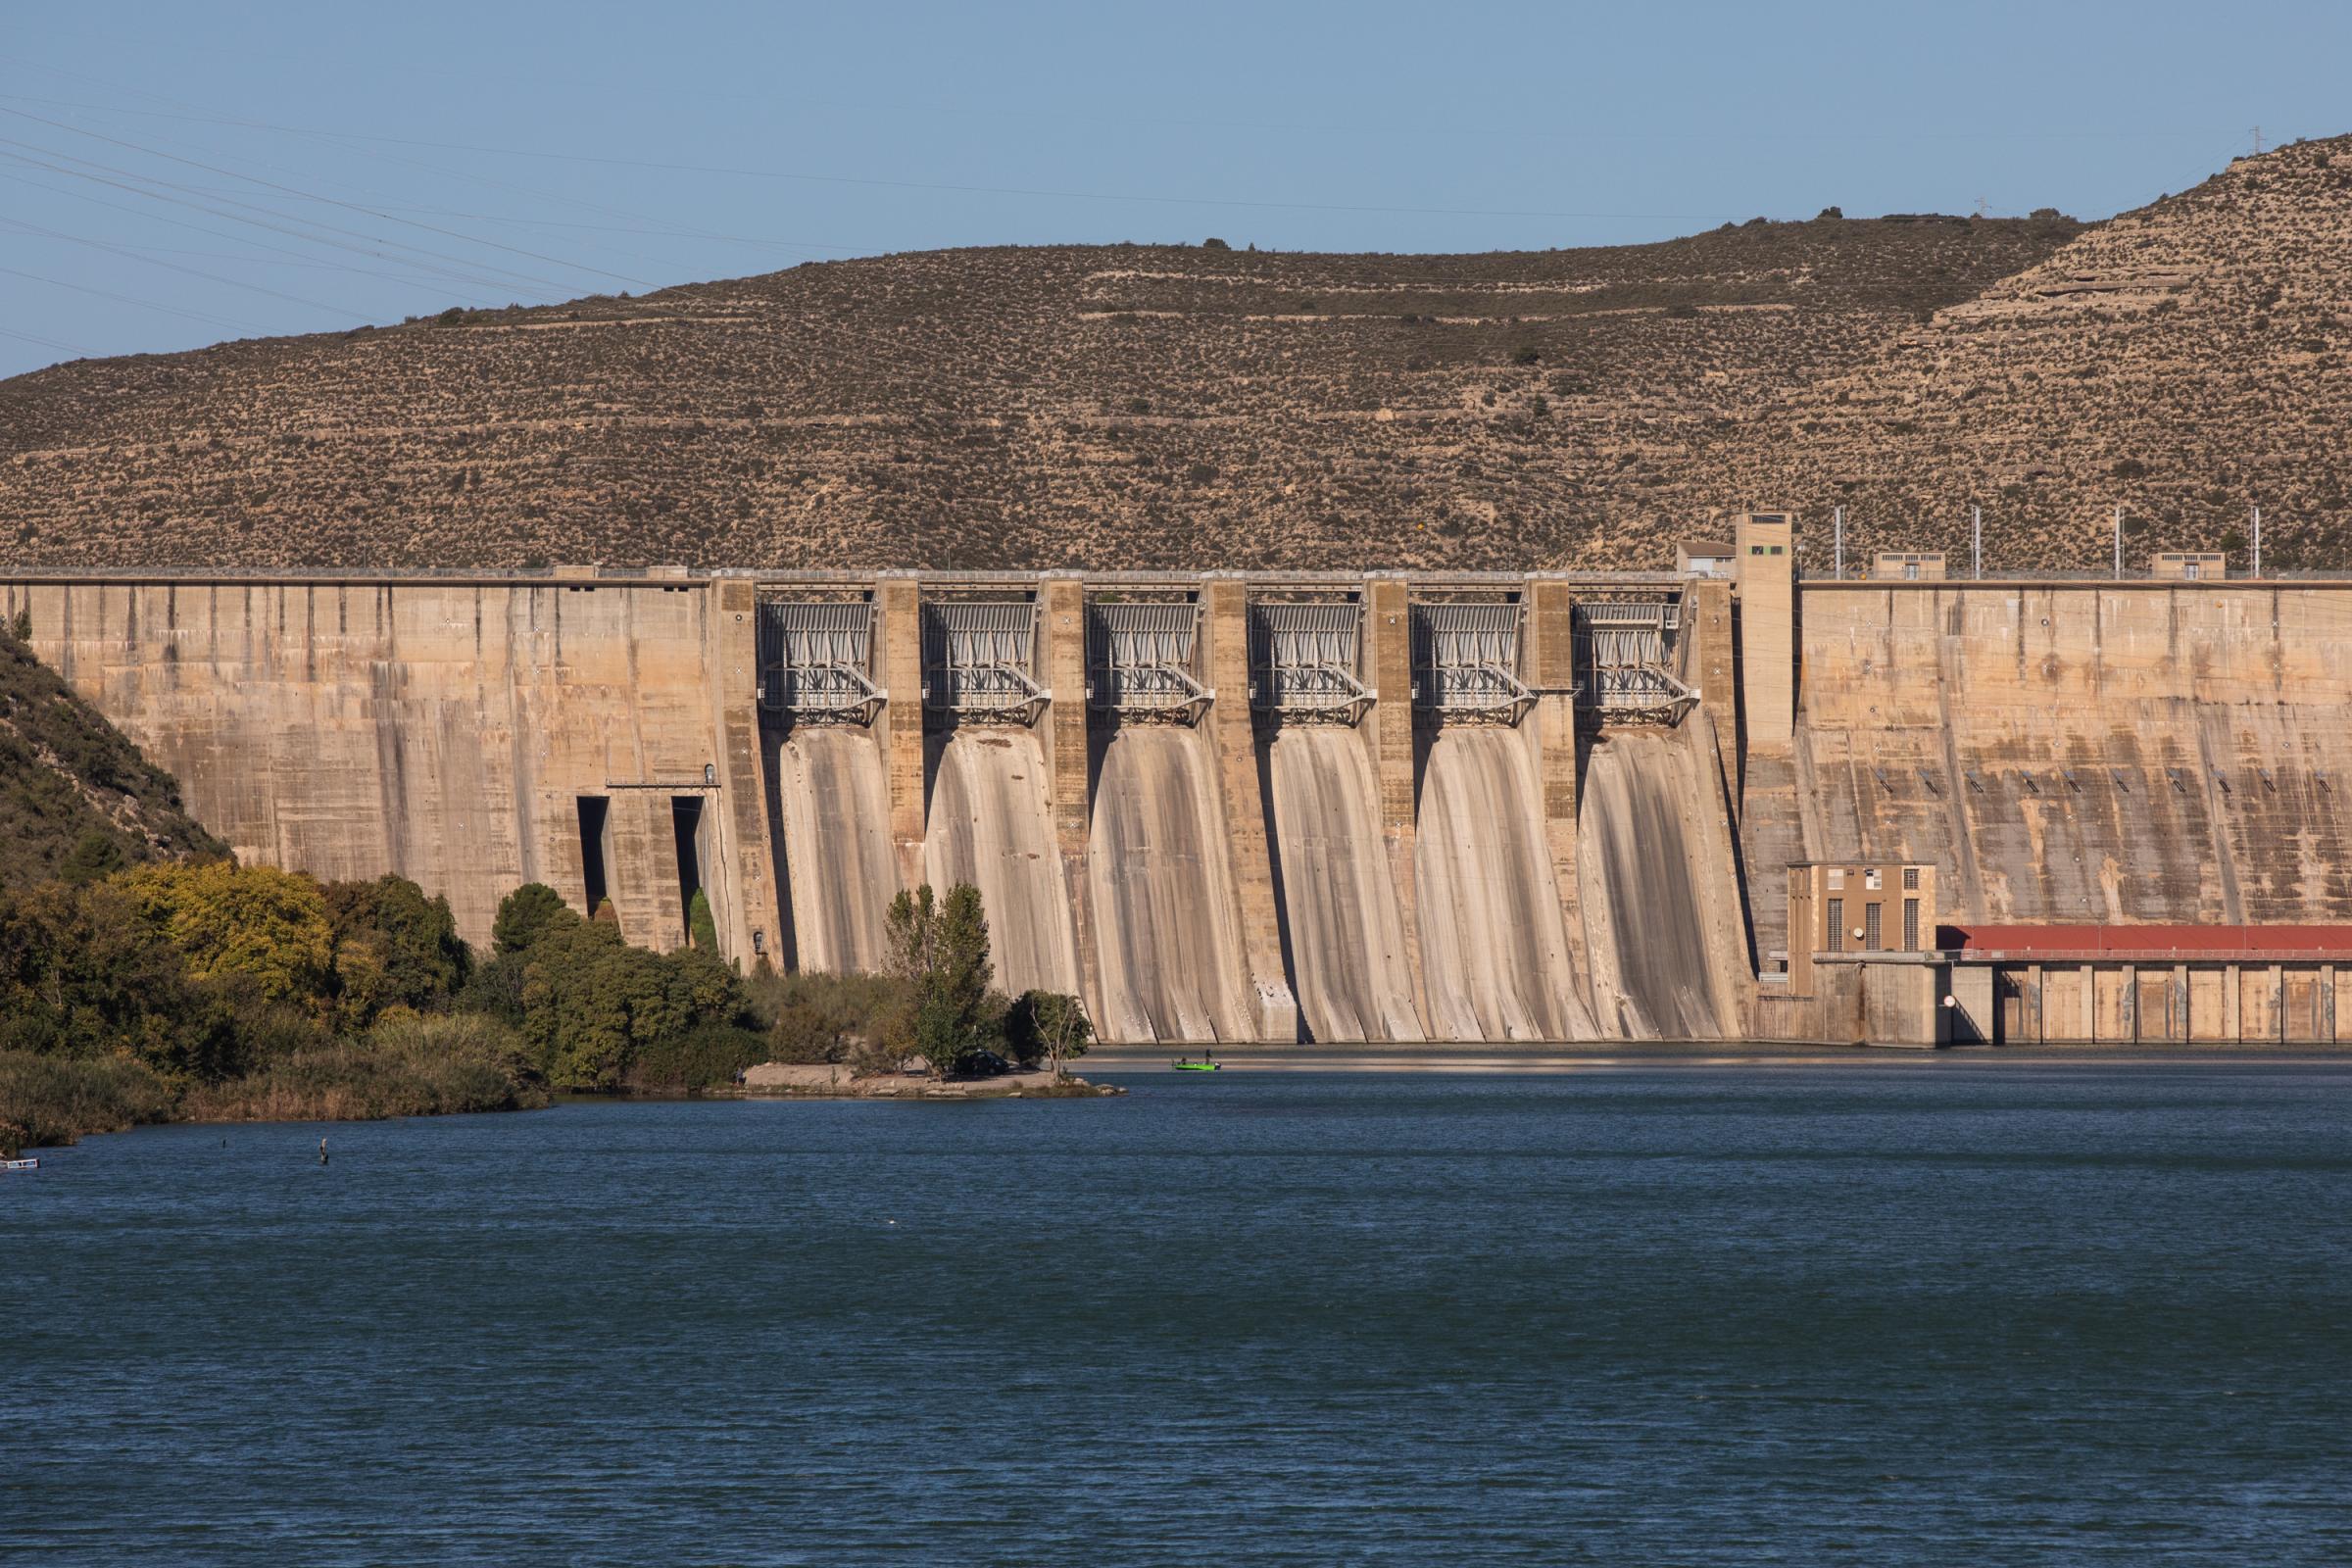 Spain's Drought Threatens Electricity Production At Mequinenza Plant - MEQUINENZA, SPAIN - NOVEMBER 05: First thing in the...